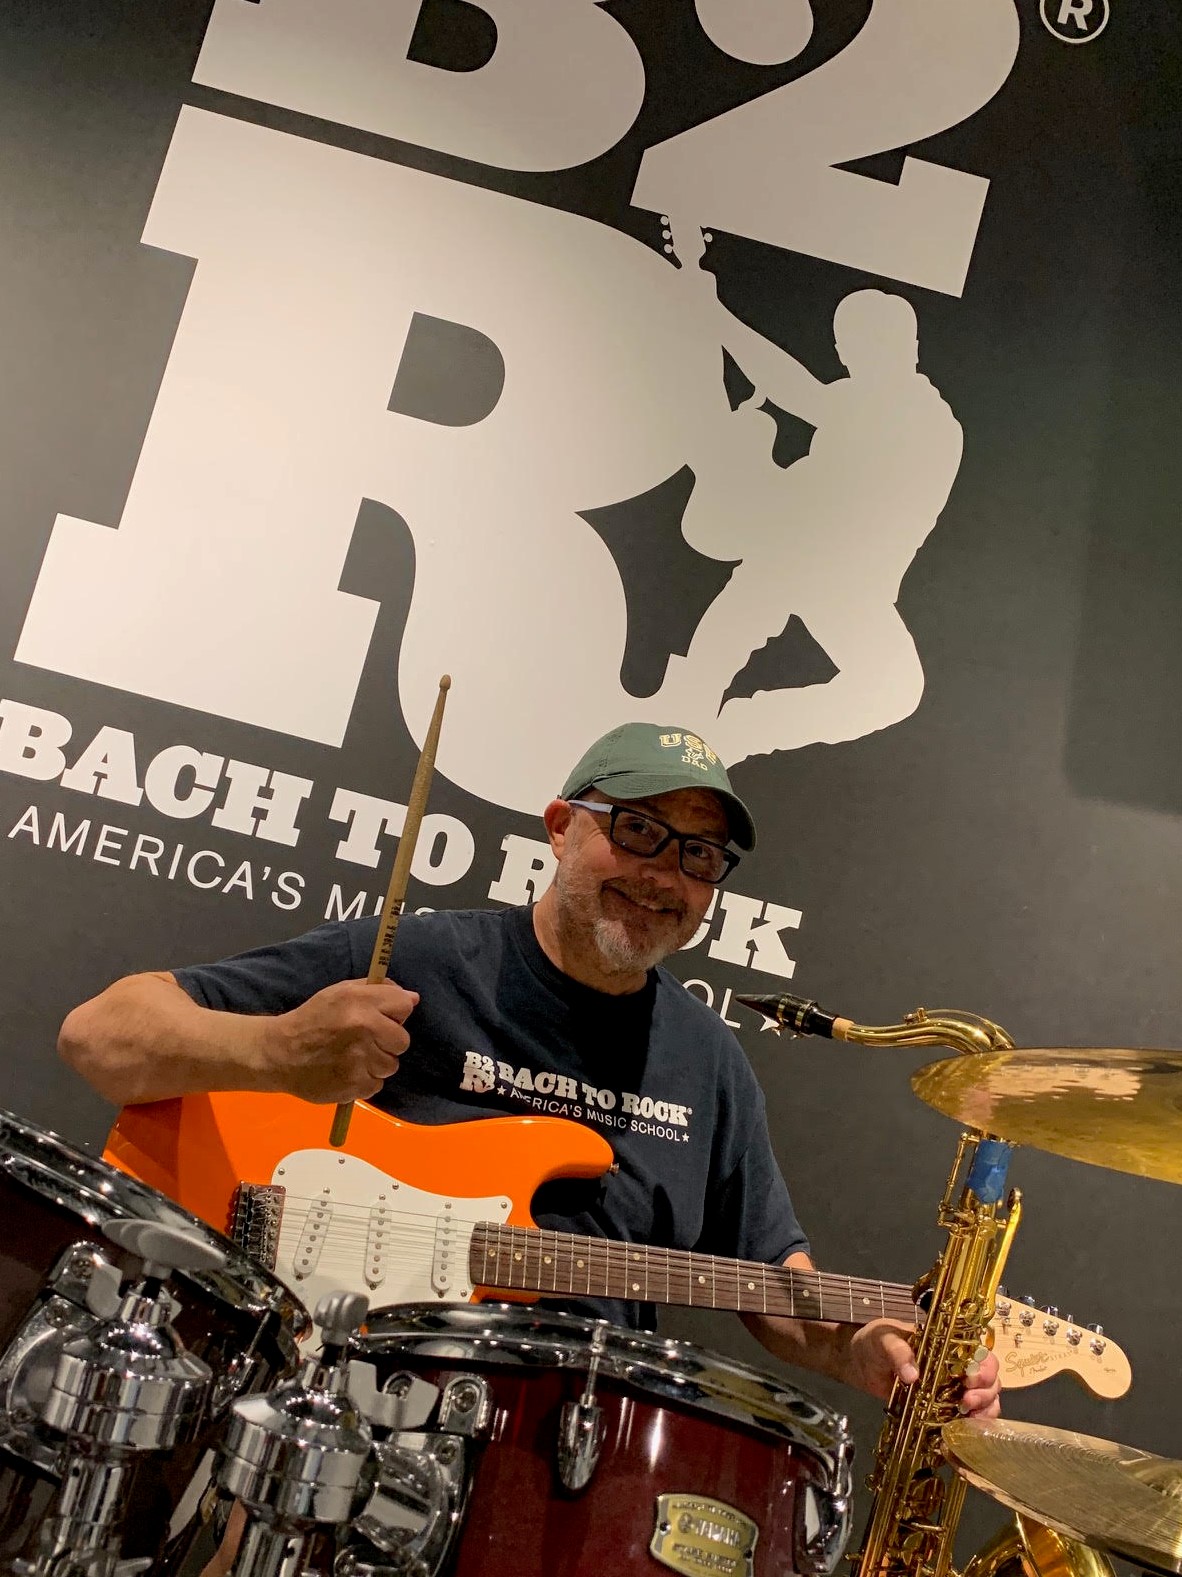 Rick Schmidt, owner of Bach to Rock Music Schools in Tampa and Orlando, has some fun on stage.